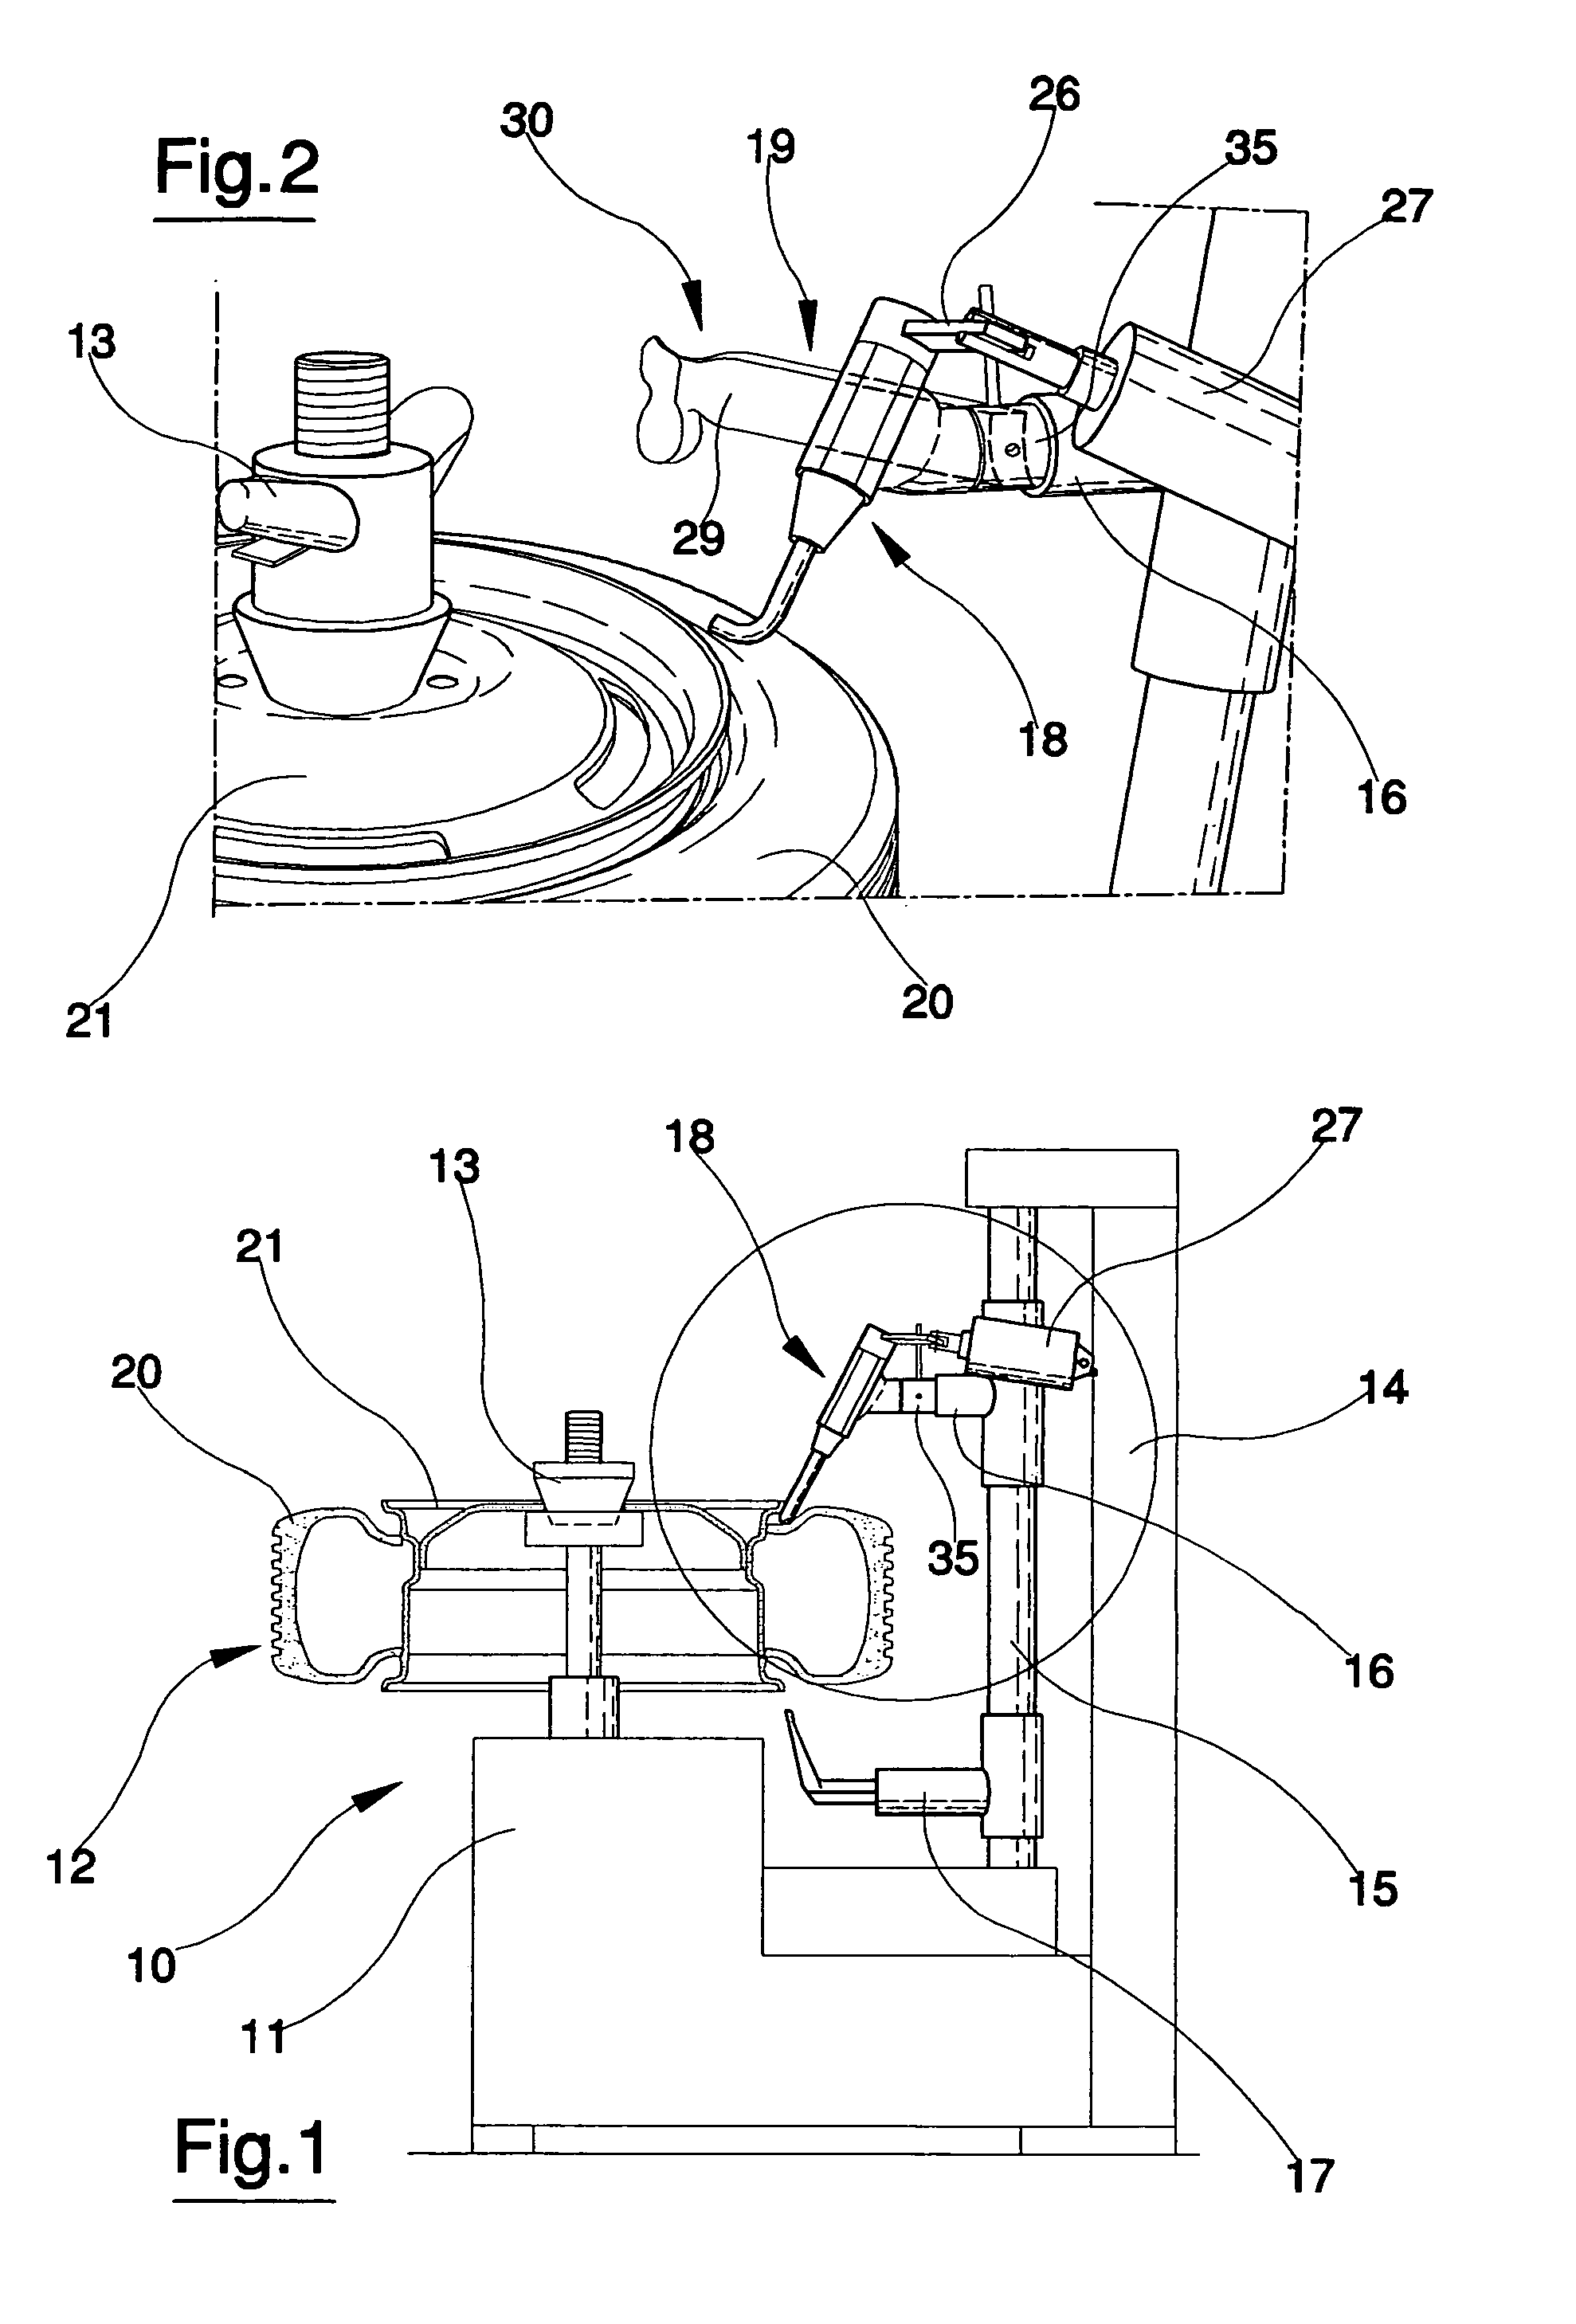 Device for mounting and dismounting tires of wheels positioned on a wheel support of a tire changing machine